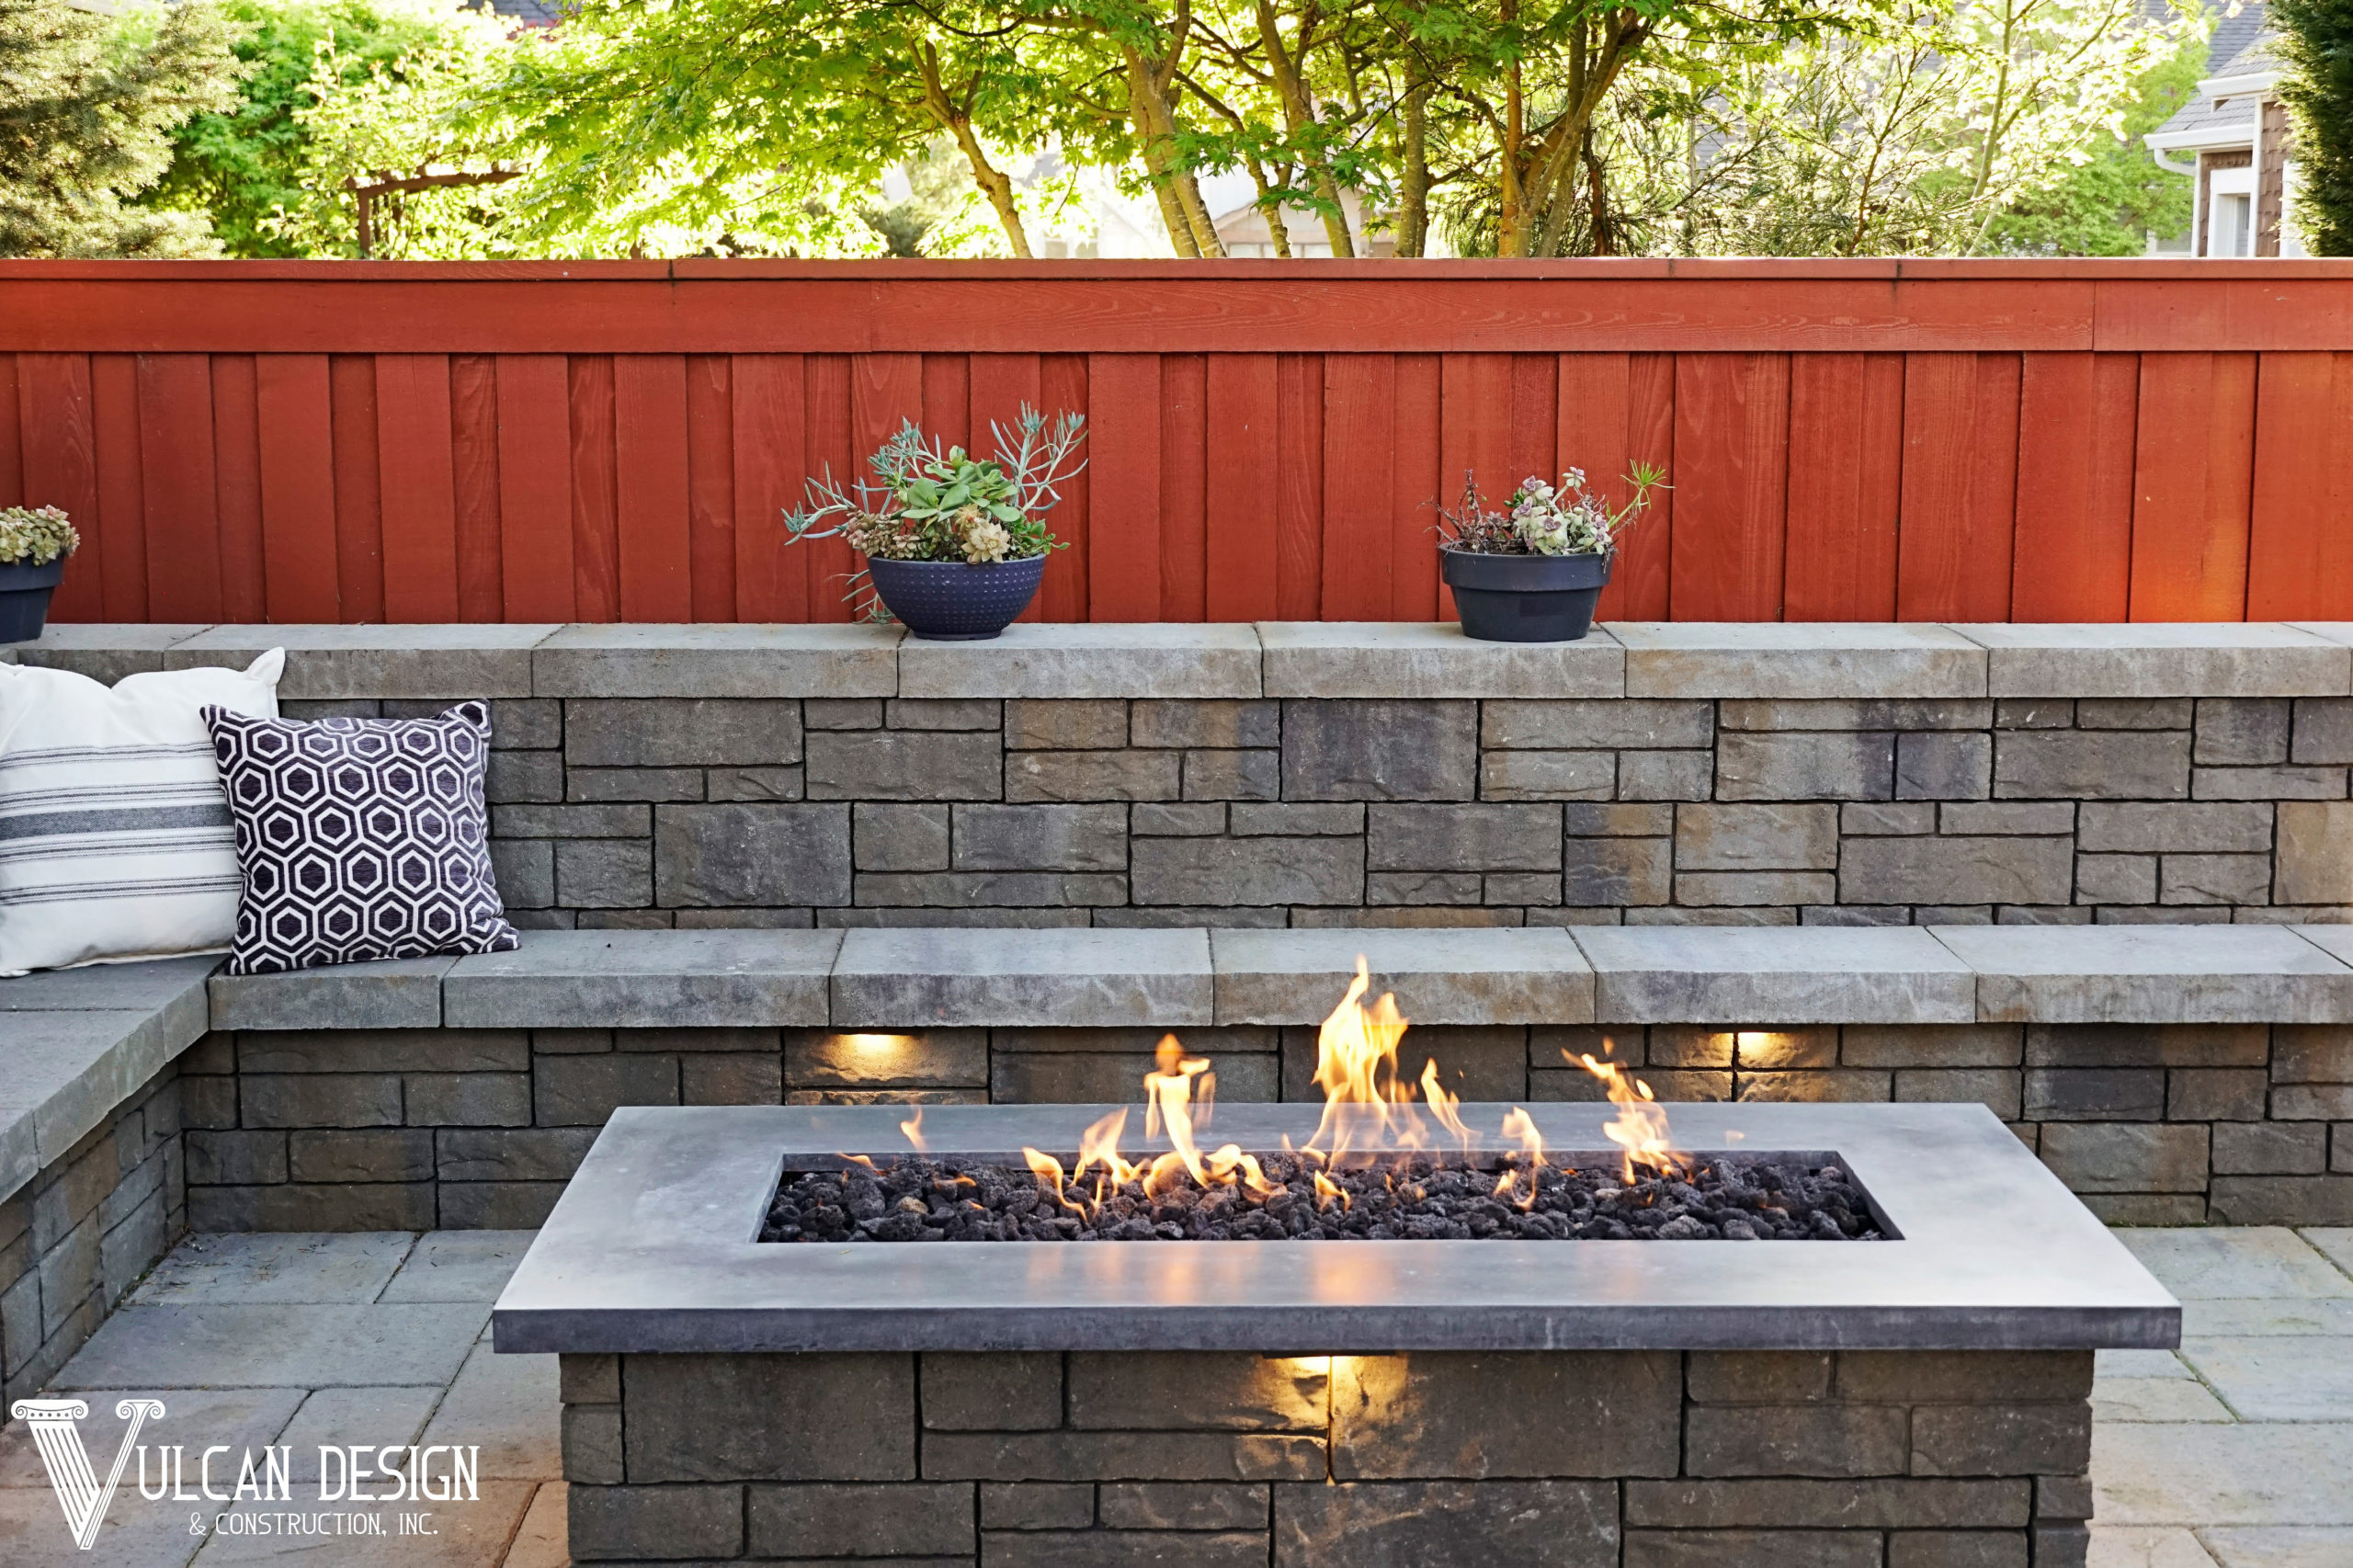 Fire Pits And Places Vulcan, Outdoor Gas Fire Pits Portland Oregon